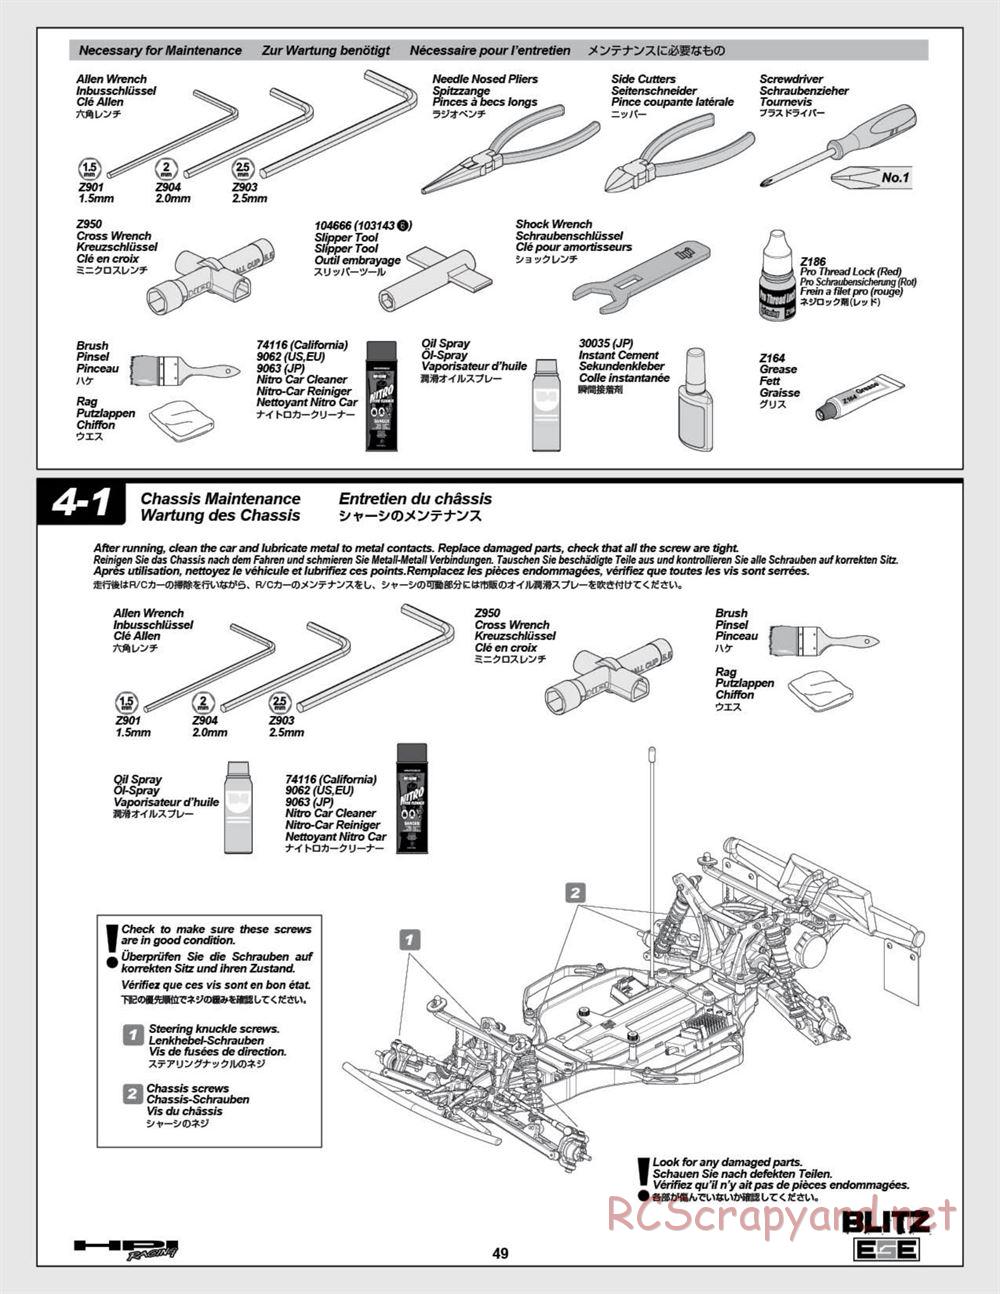 HPI - Blitz ESE - Manual - Page 49